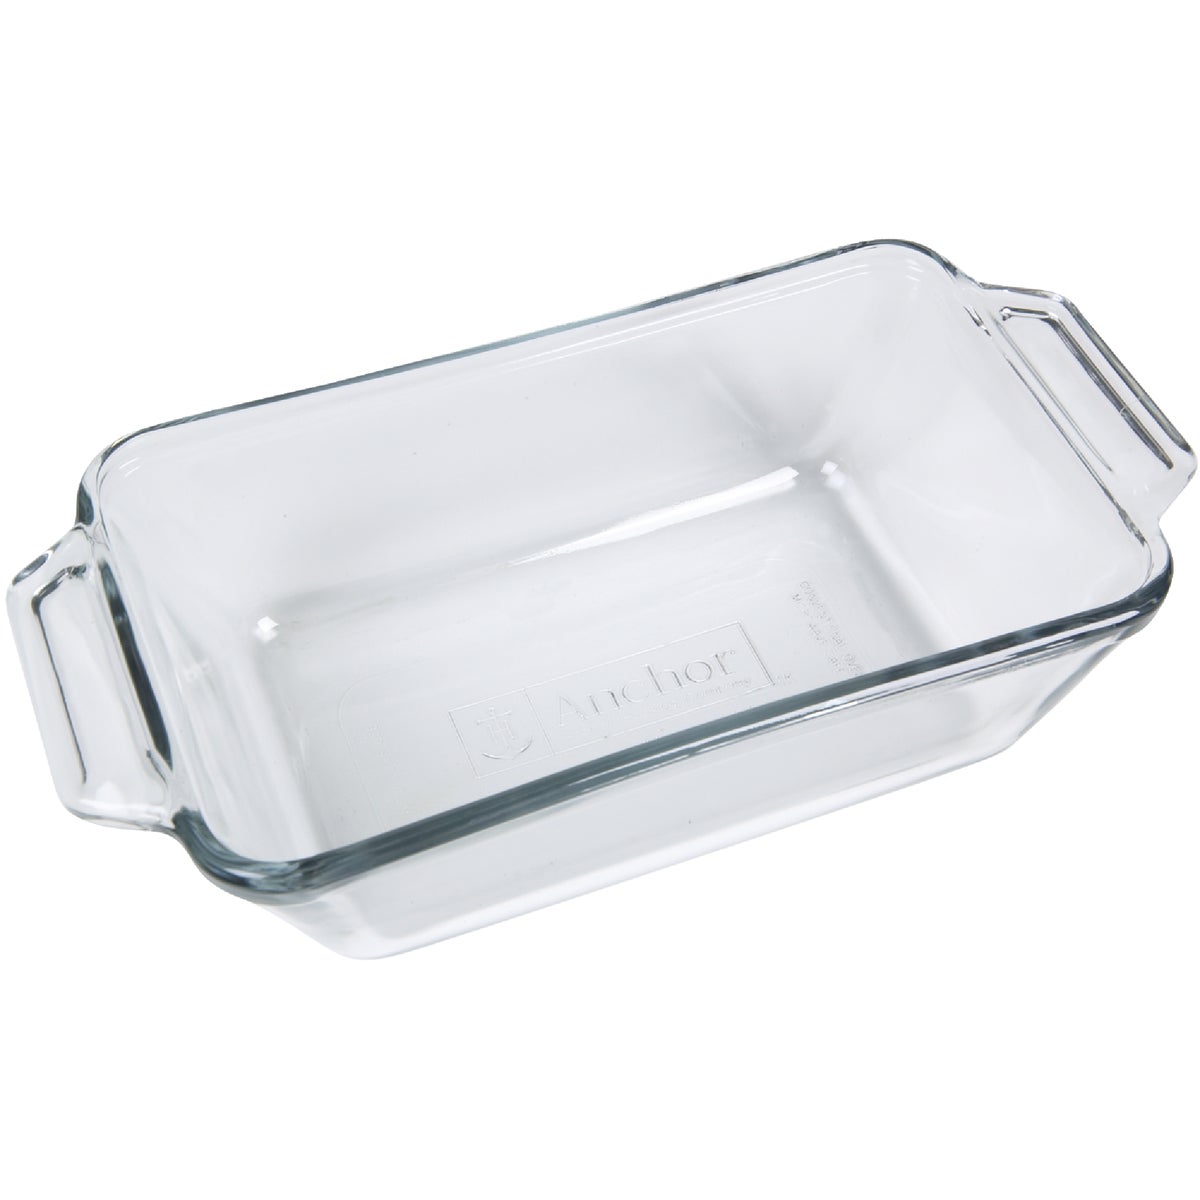 Item 656392, Safe for the dishwasher, microwave, oven, refrigerator, and freezer.